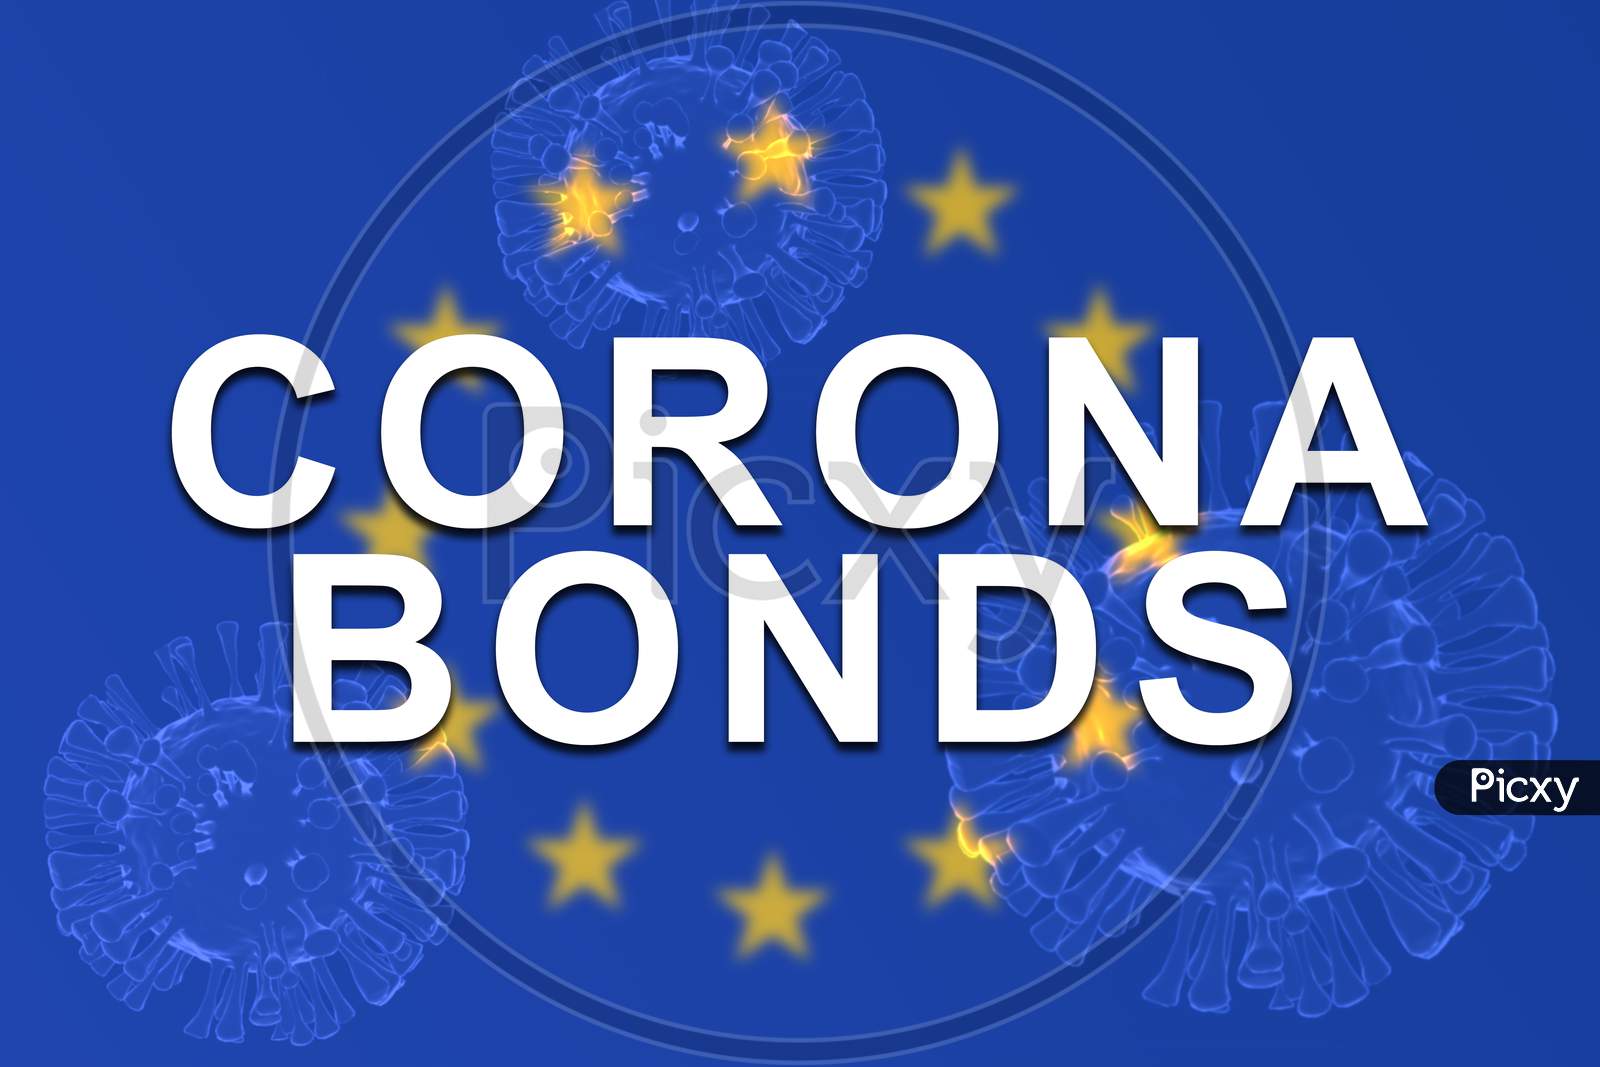 Corona Bonds On Eu Or European Union Flag With 3D Rendered Illustration Of Virus As Background.